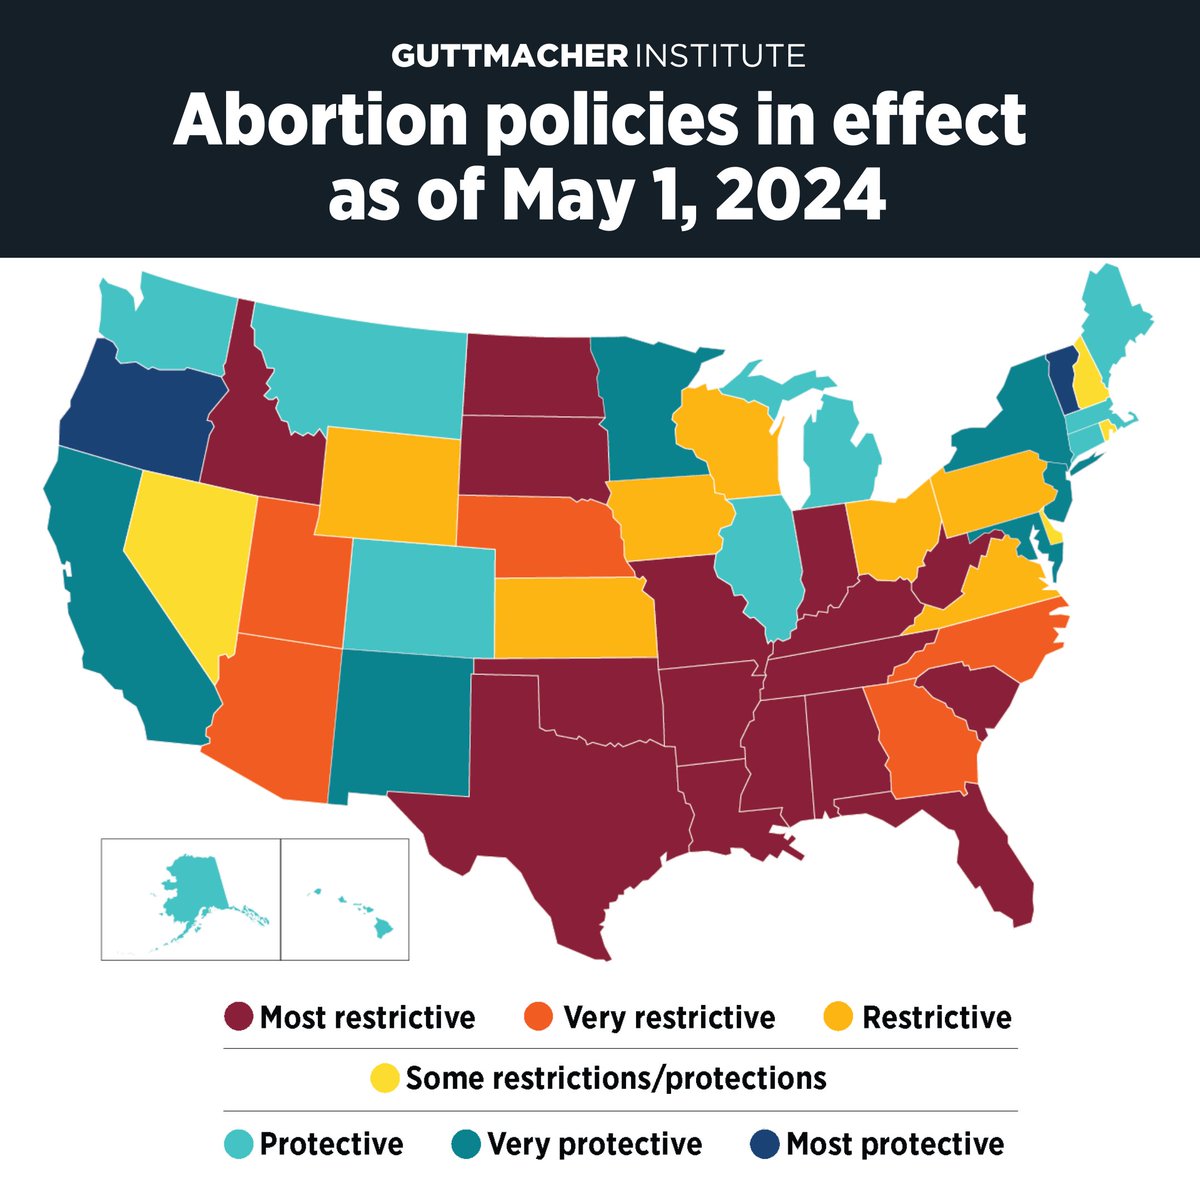 With Florida’s 6-week ban now in effect, the state moves into the Most Restrictive category on our map because it has a host of other restrictions that make accessing care before 6 weeks impossible for many. See the latest abortion polices in FL: states.guttmacher.org/policies/flori…